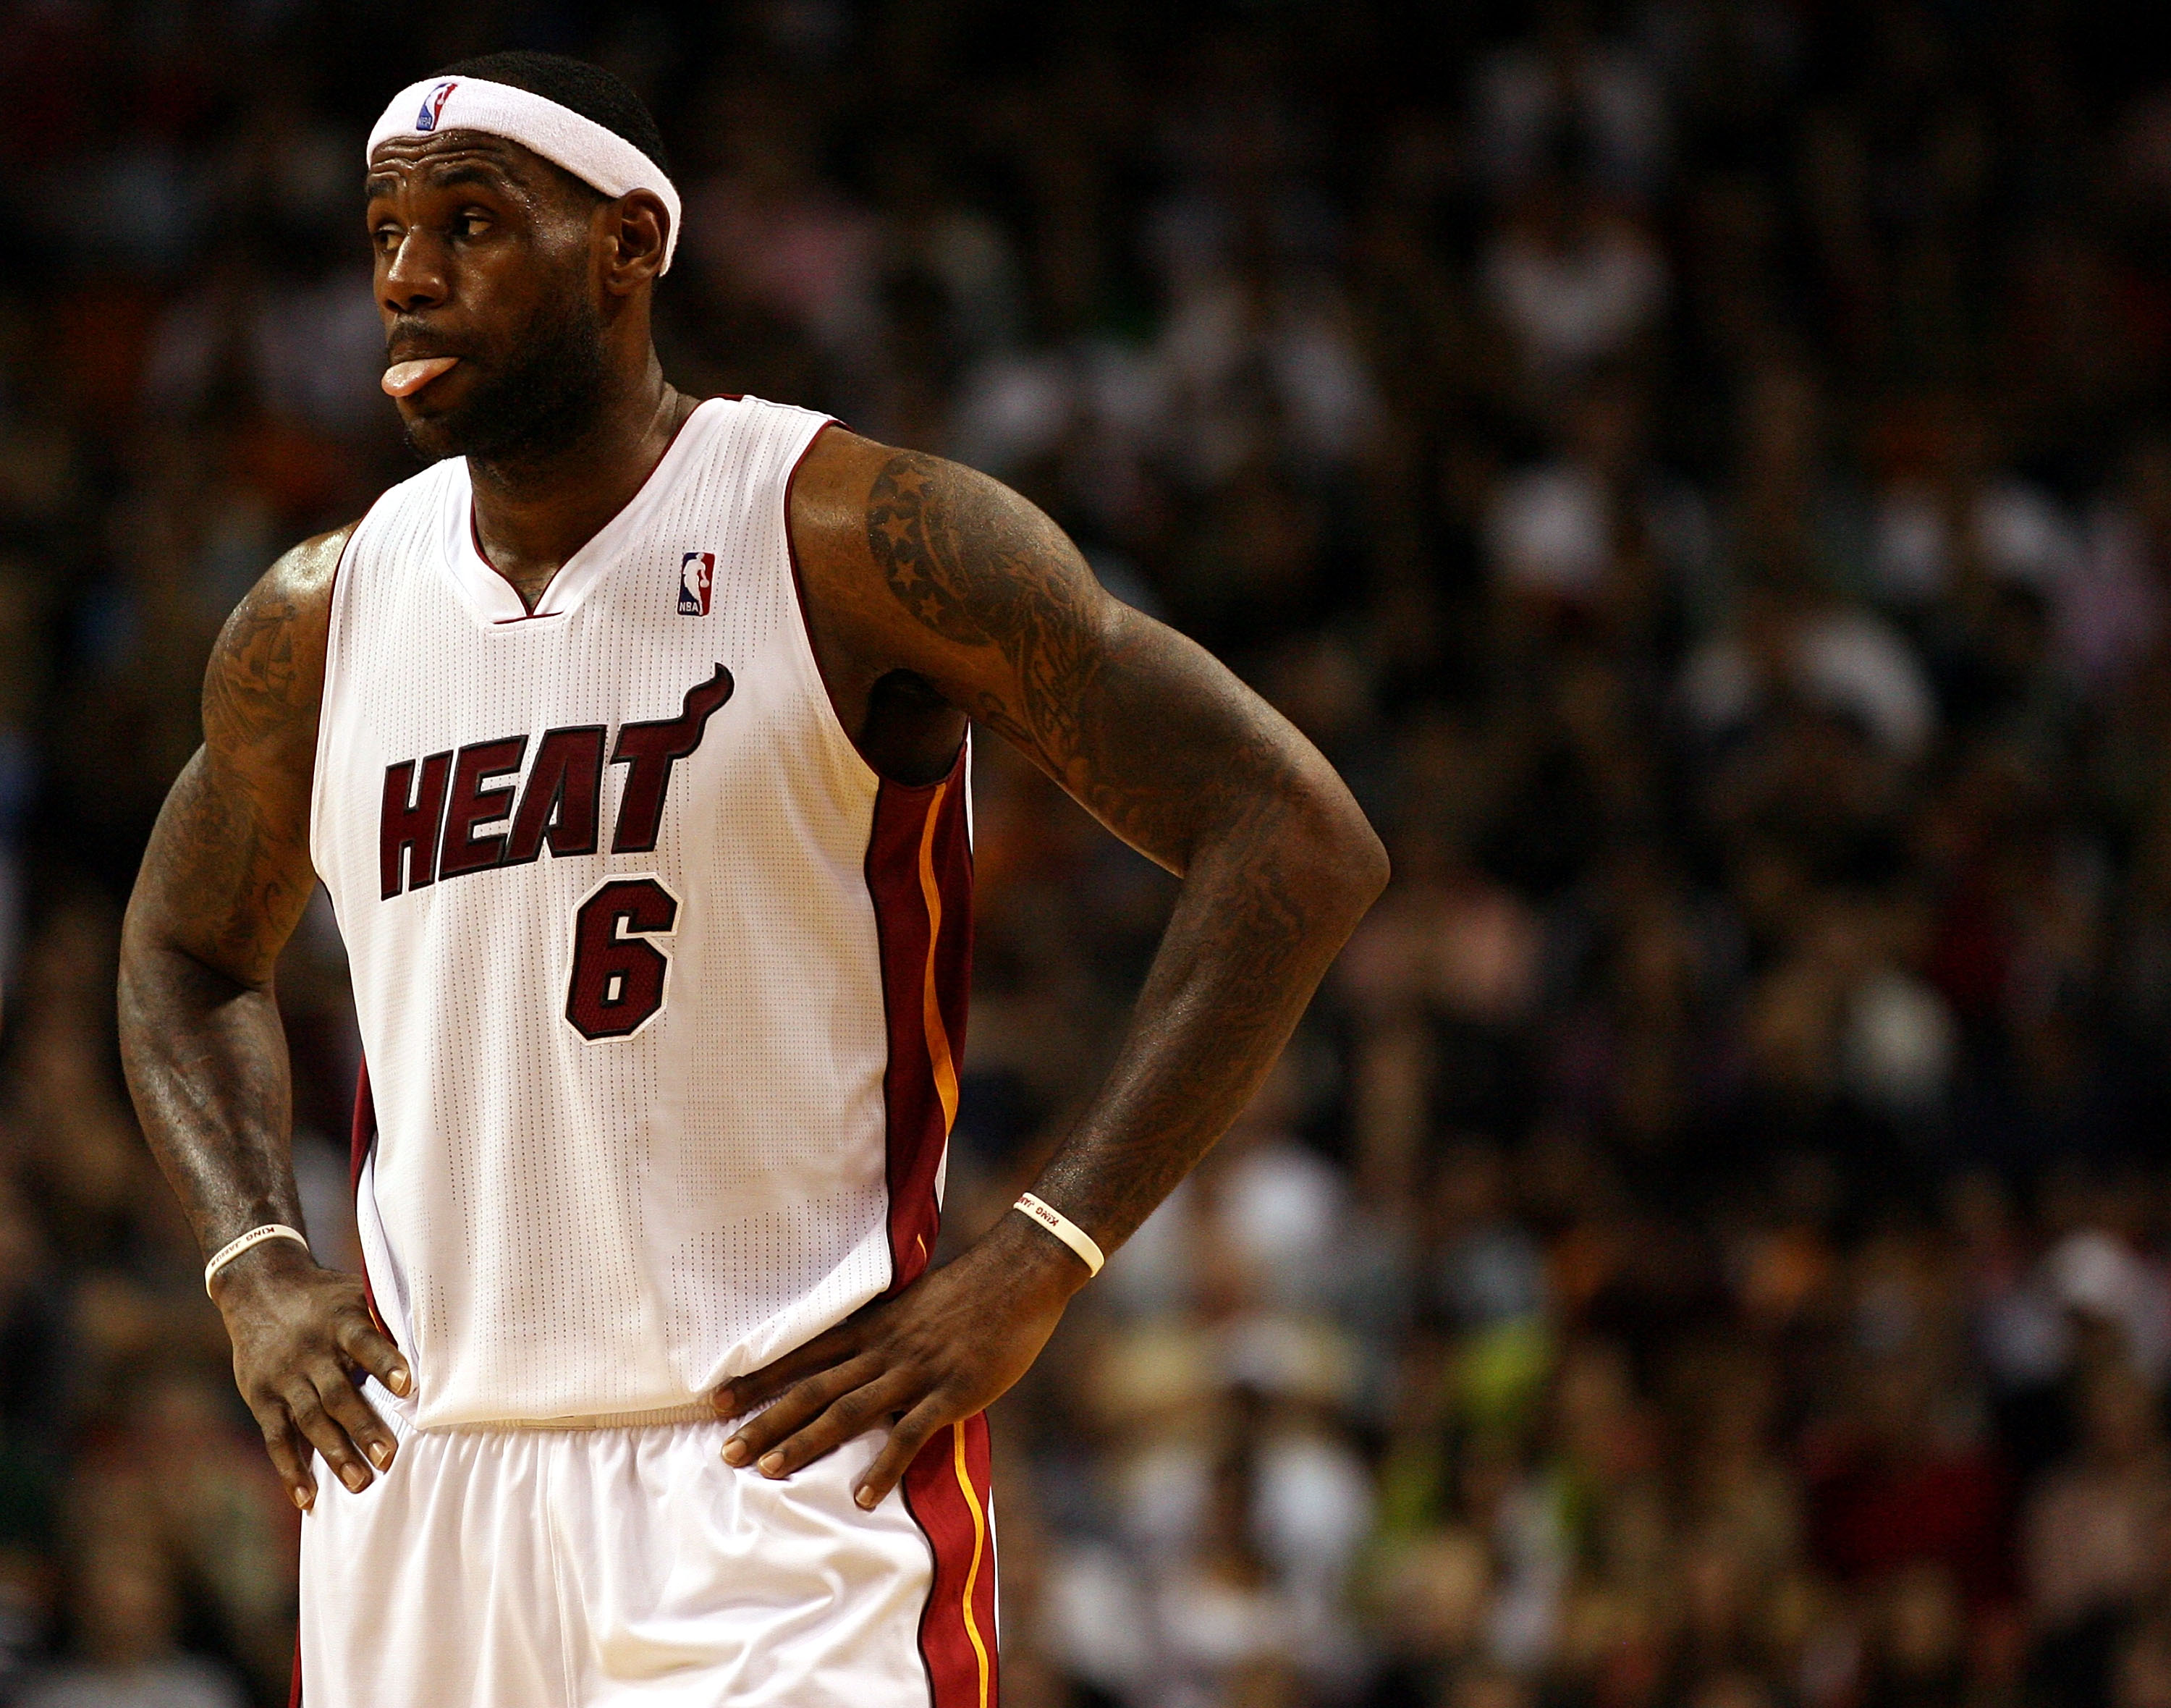 LeBron James says Miami Heat are not happy about Christmas Day jerseys